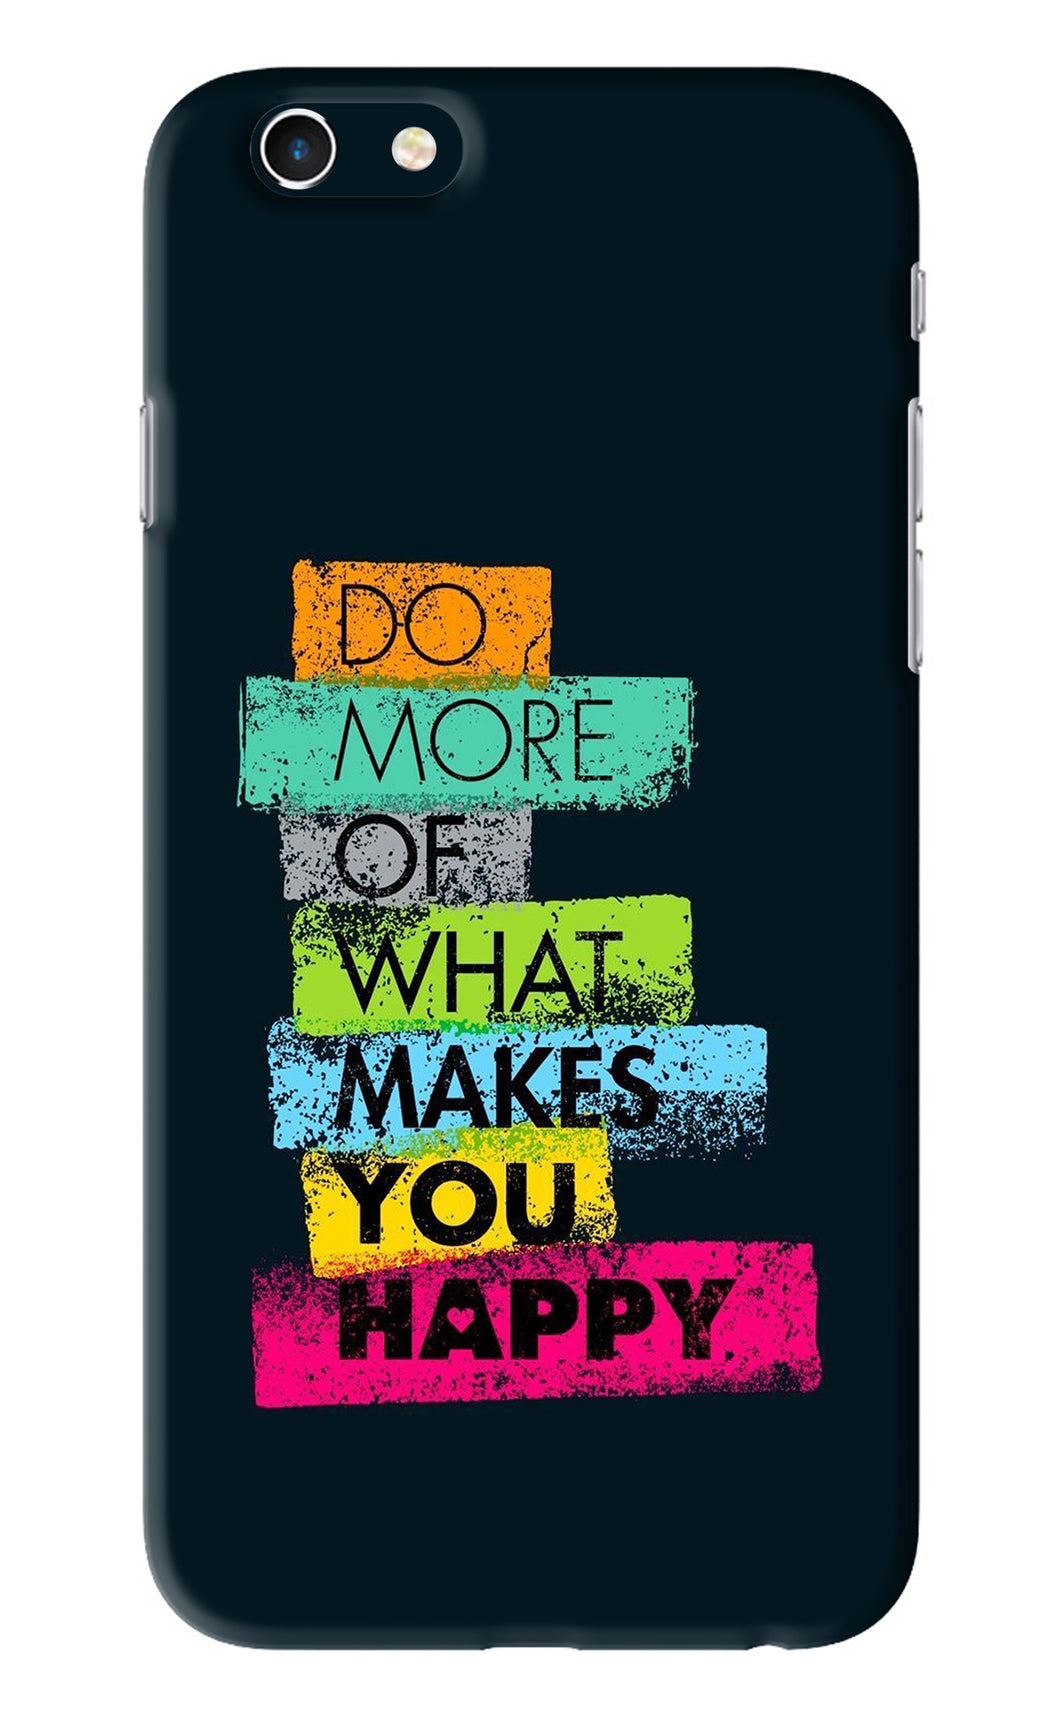 Do More Of What Makes You Happy iPhone 6 Back Skin Wrap